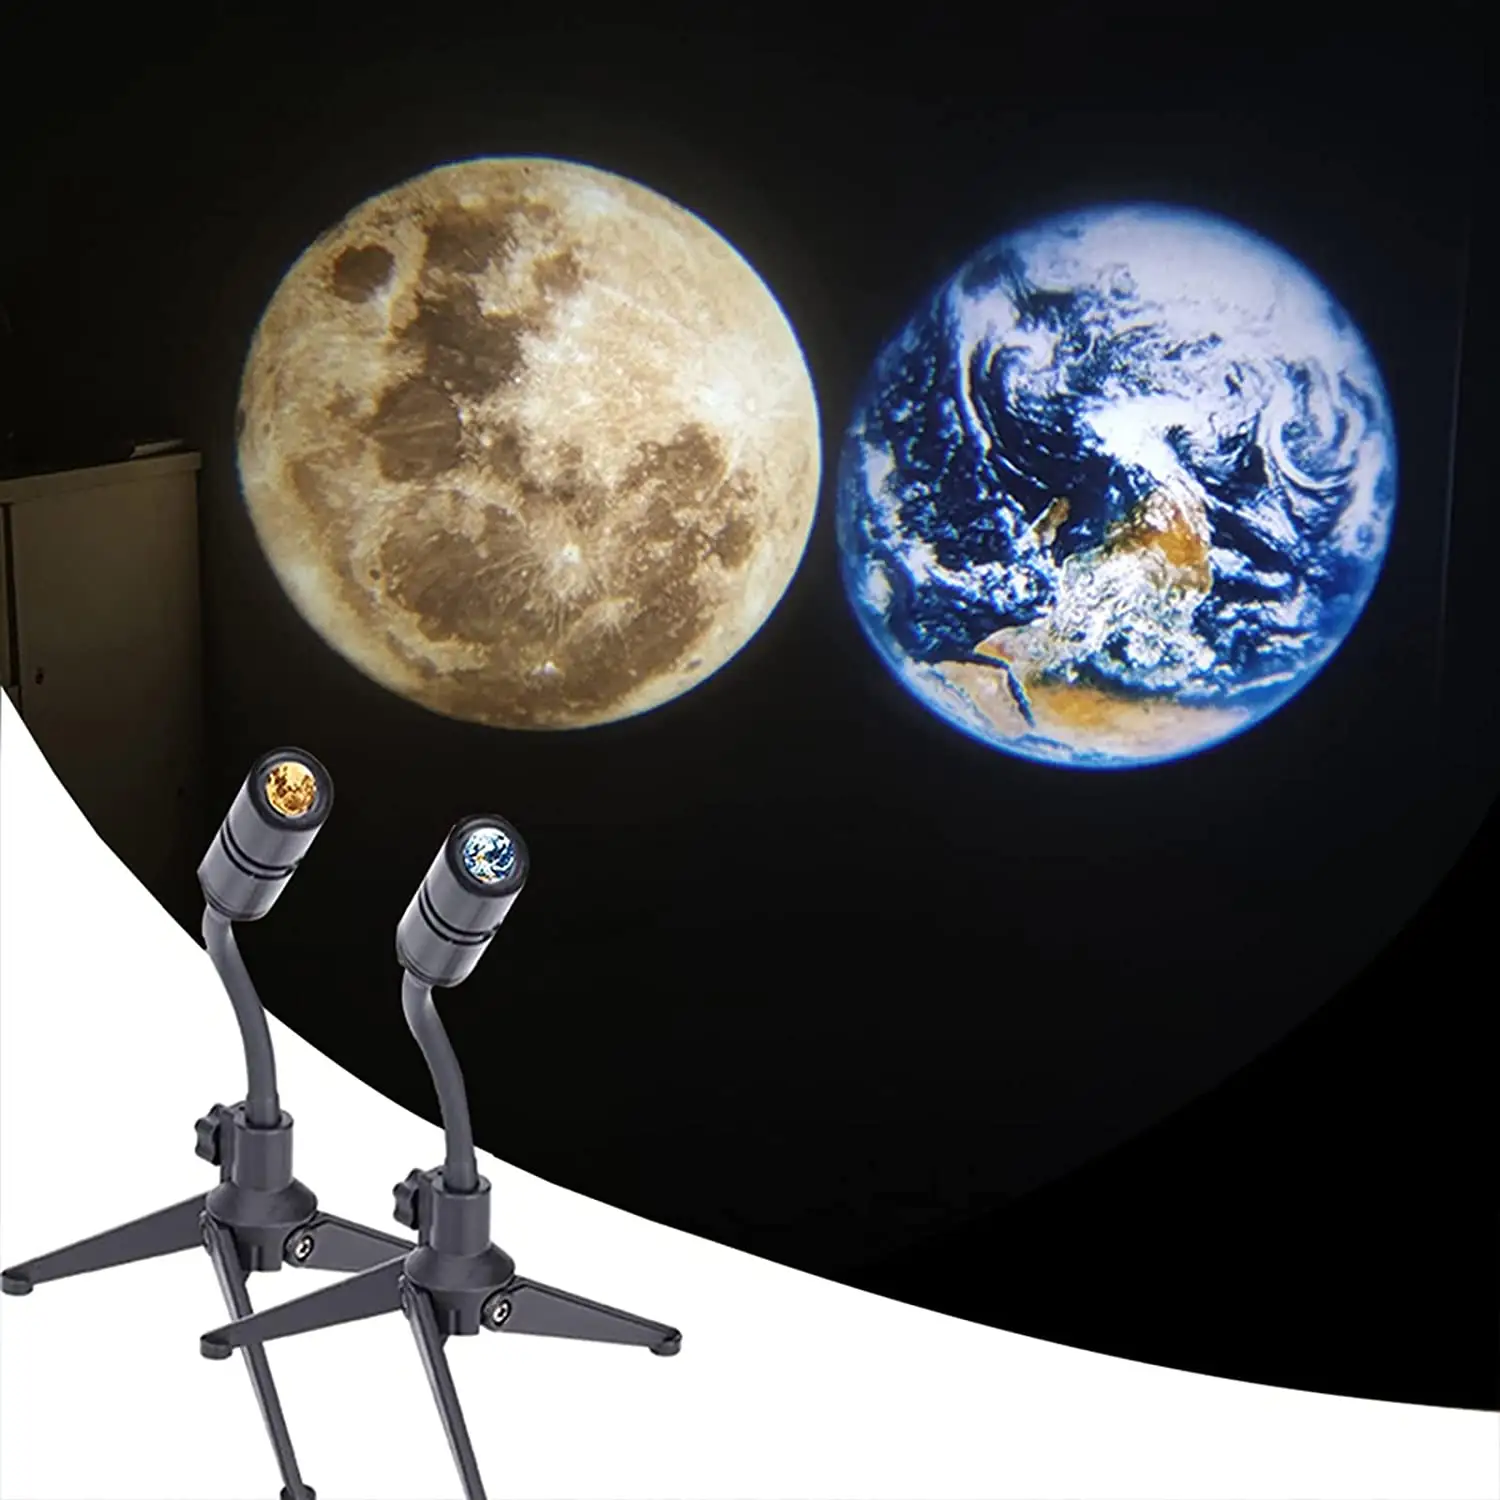 Moon Lamp Star Projector USB Night Light Earth Moon Projection Lamp Decor for Bedroom Gift Room Decor Photo Background